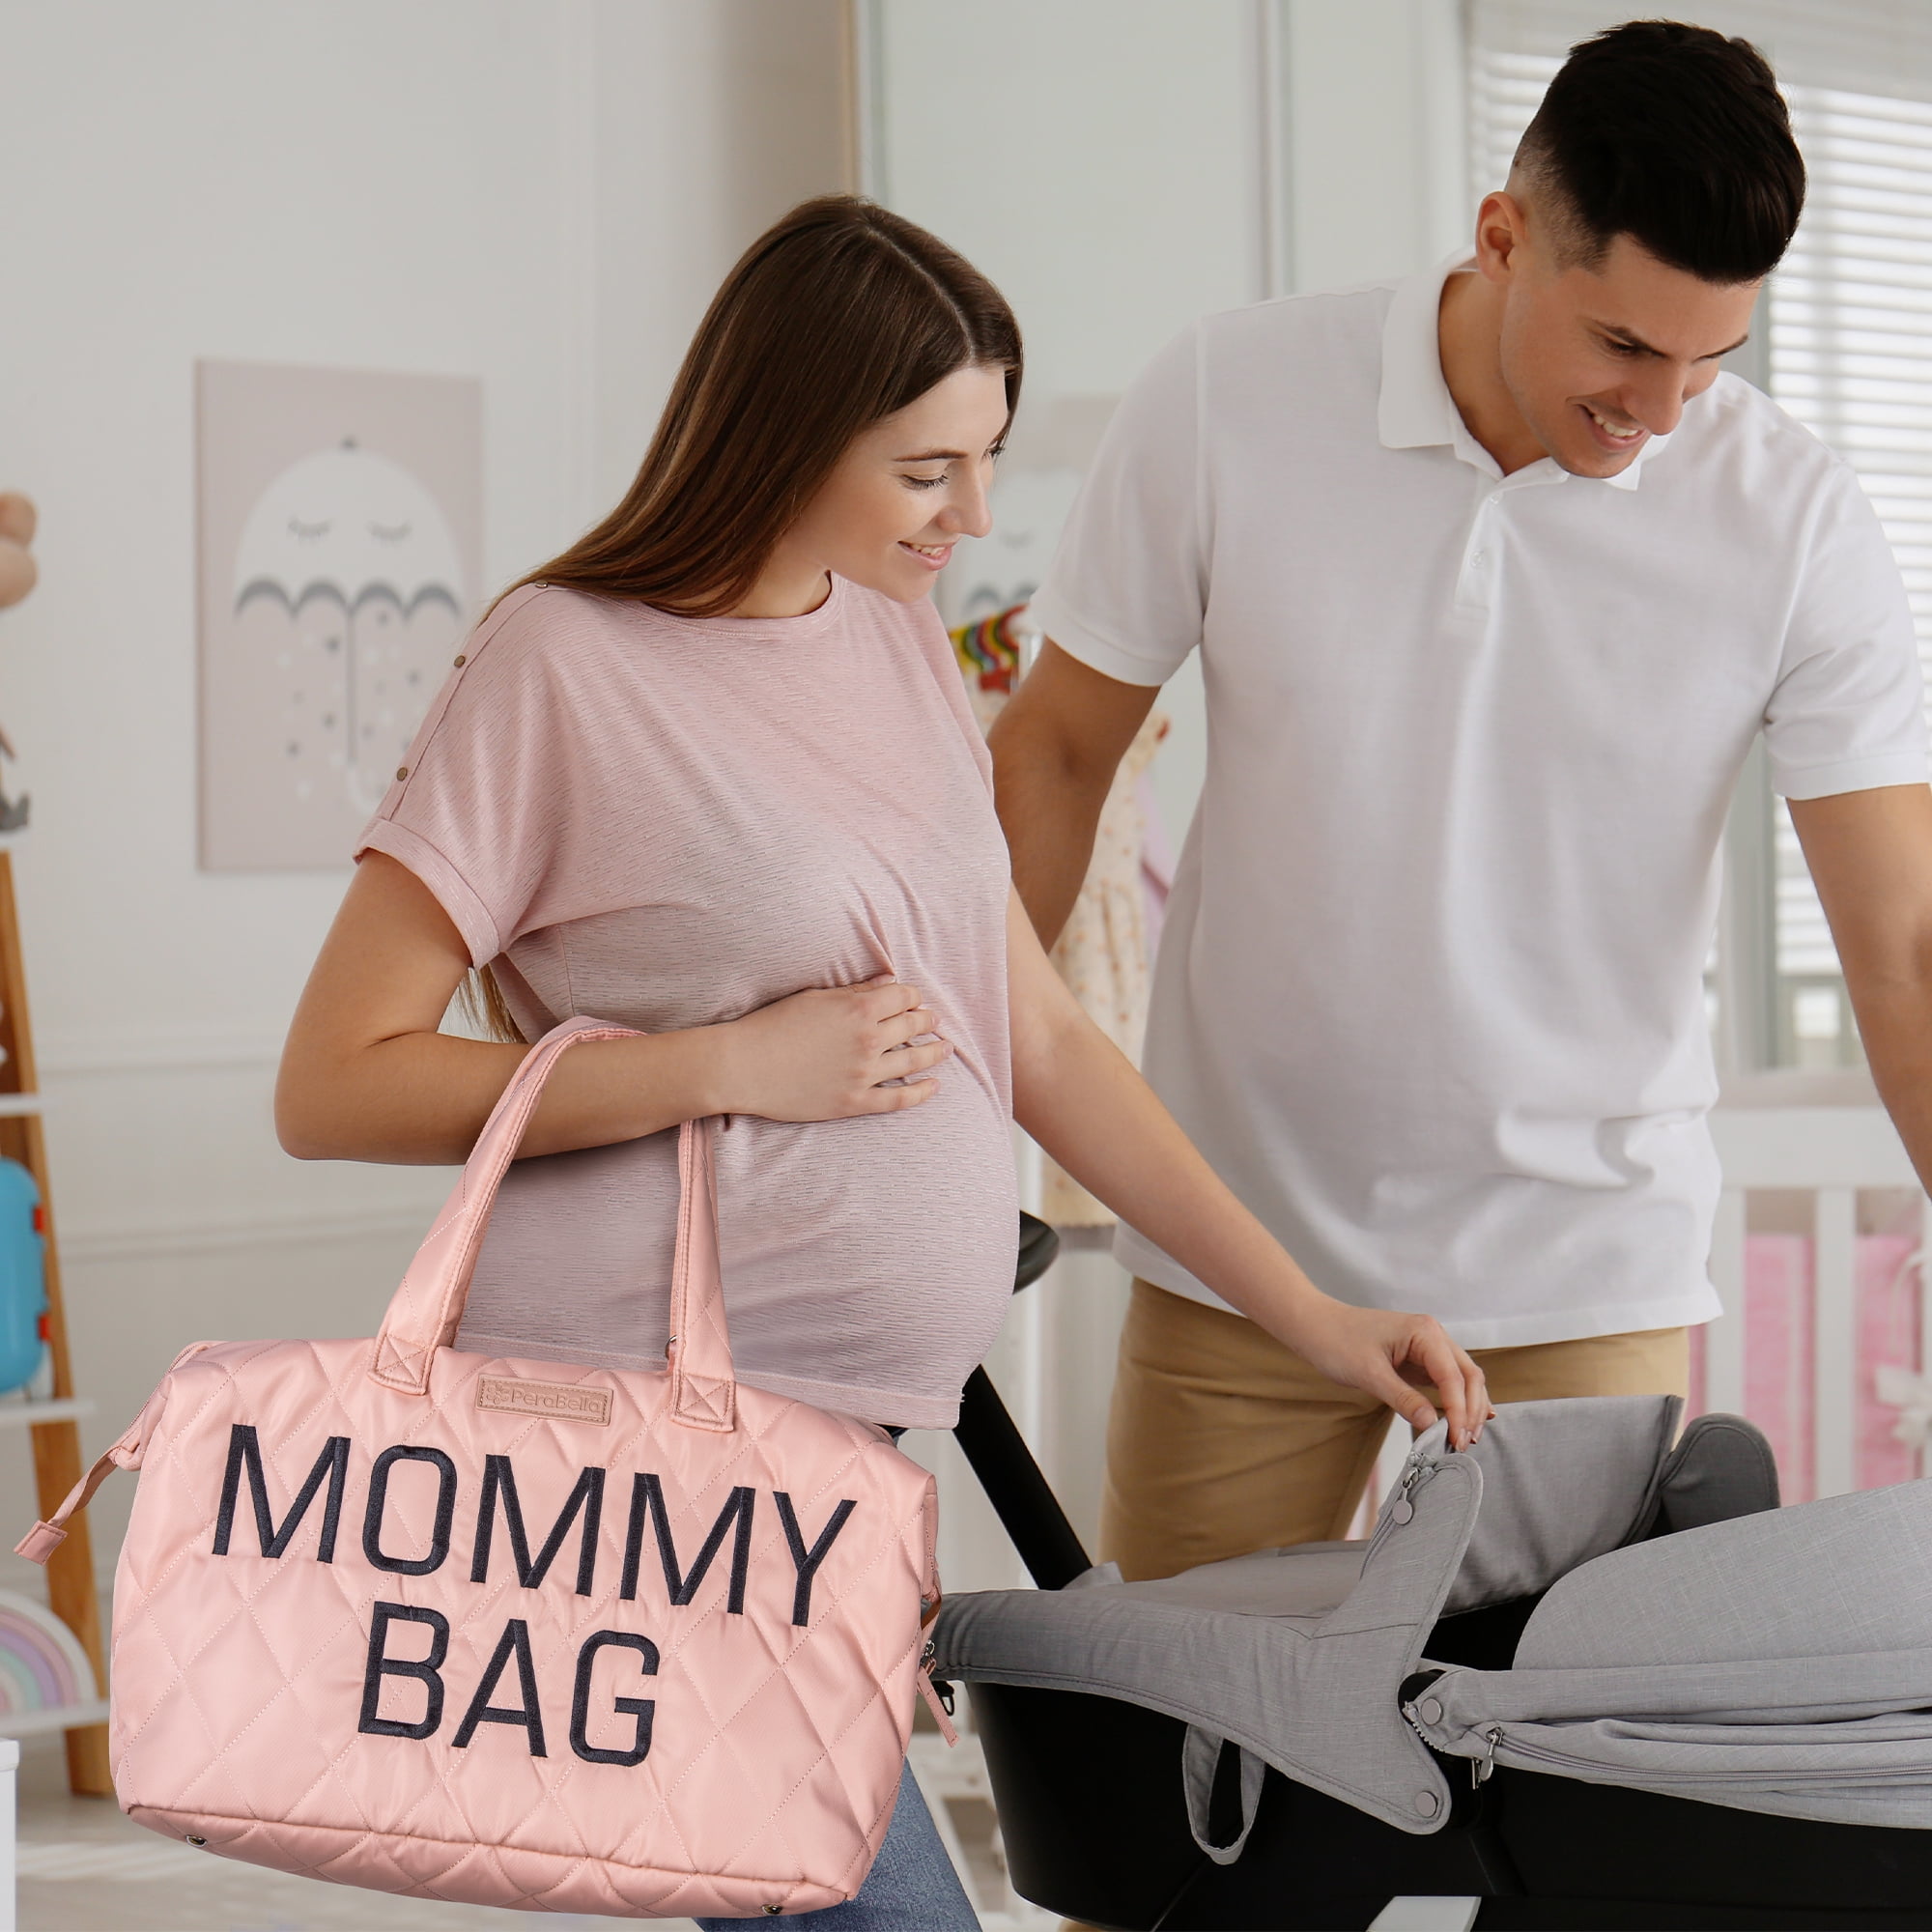 PeraBella Mommy Bag for Mother's , Hospital Labor and Delivery, Diaper Bag  Tote, Maternity Hospital Bag (Pink)